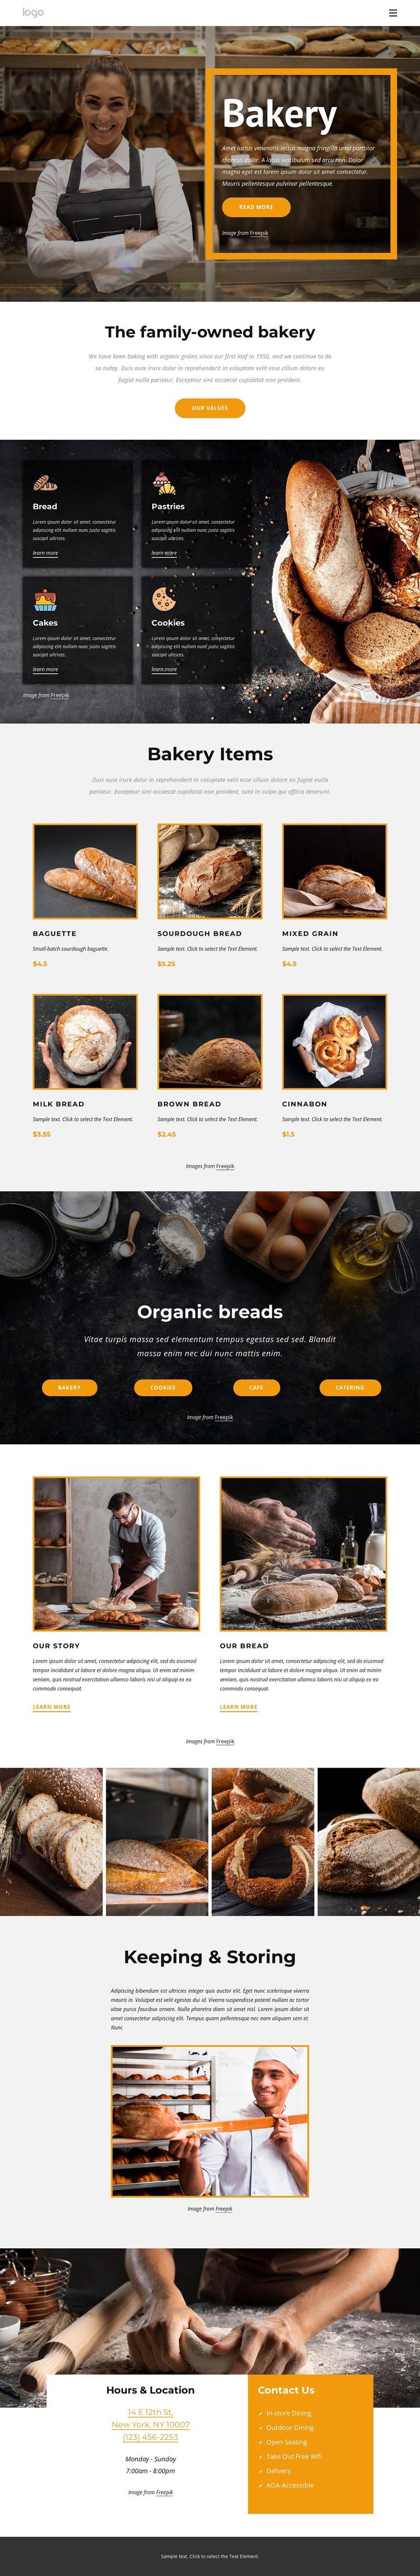 The family-owned bakery CSS Template